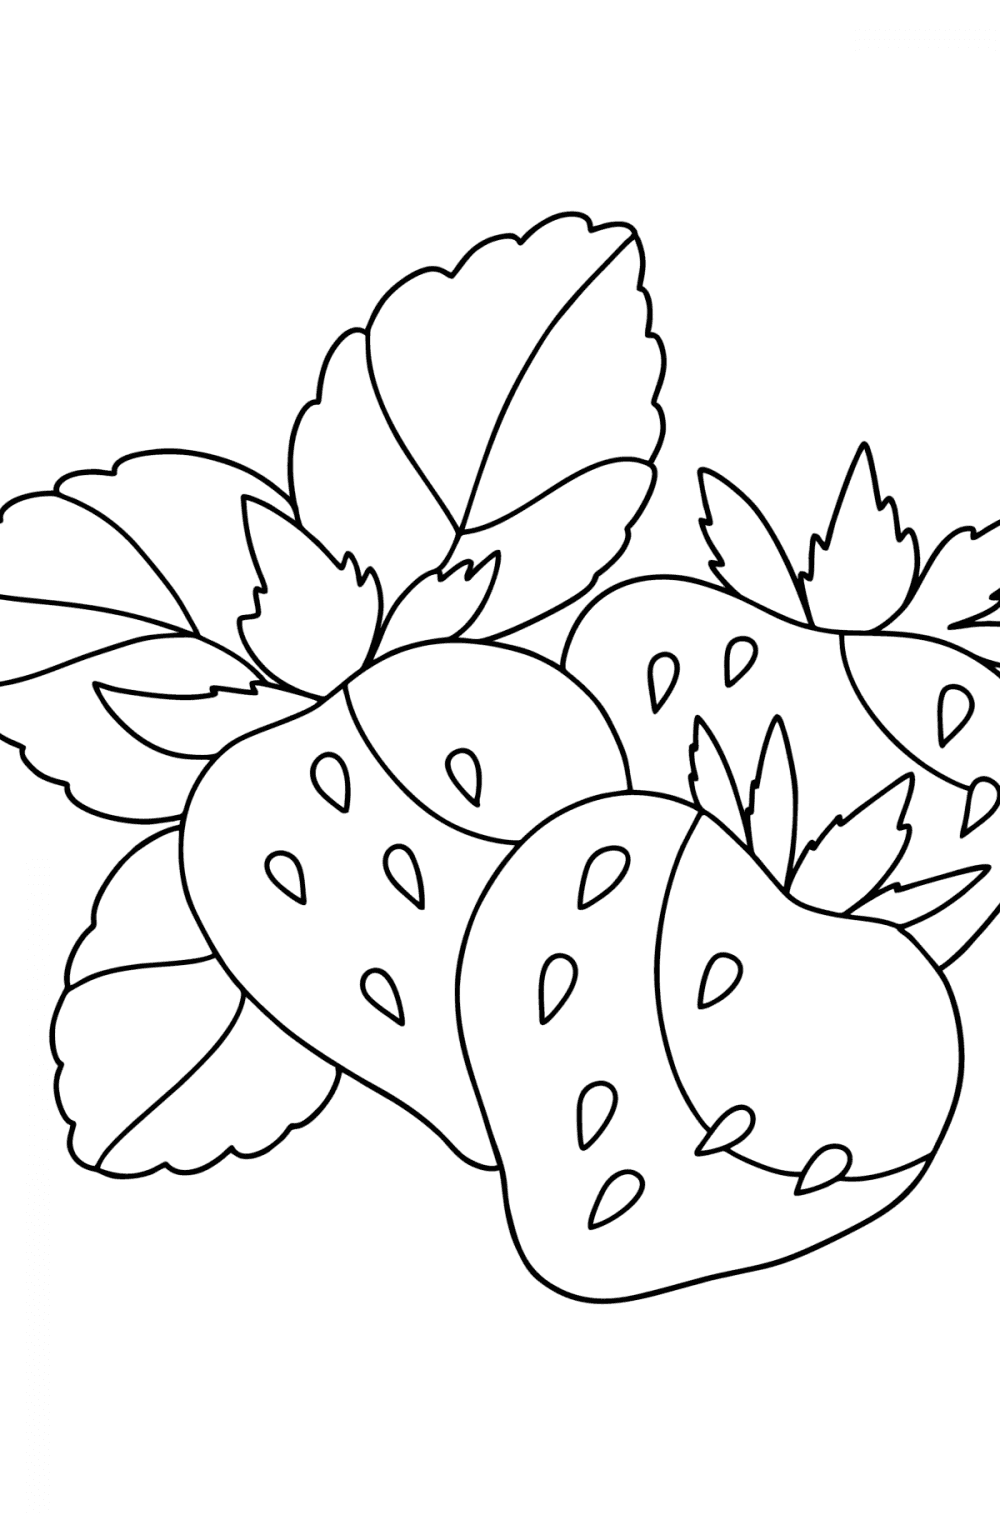 Coloring page Ripe strawberries for Kids - Play online for Free